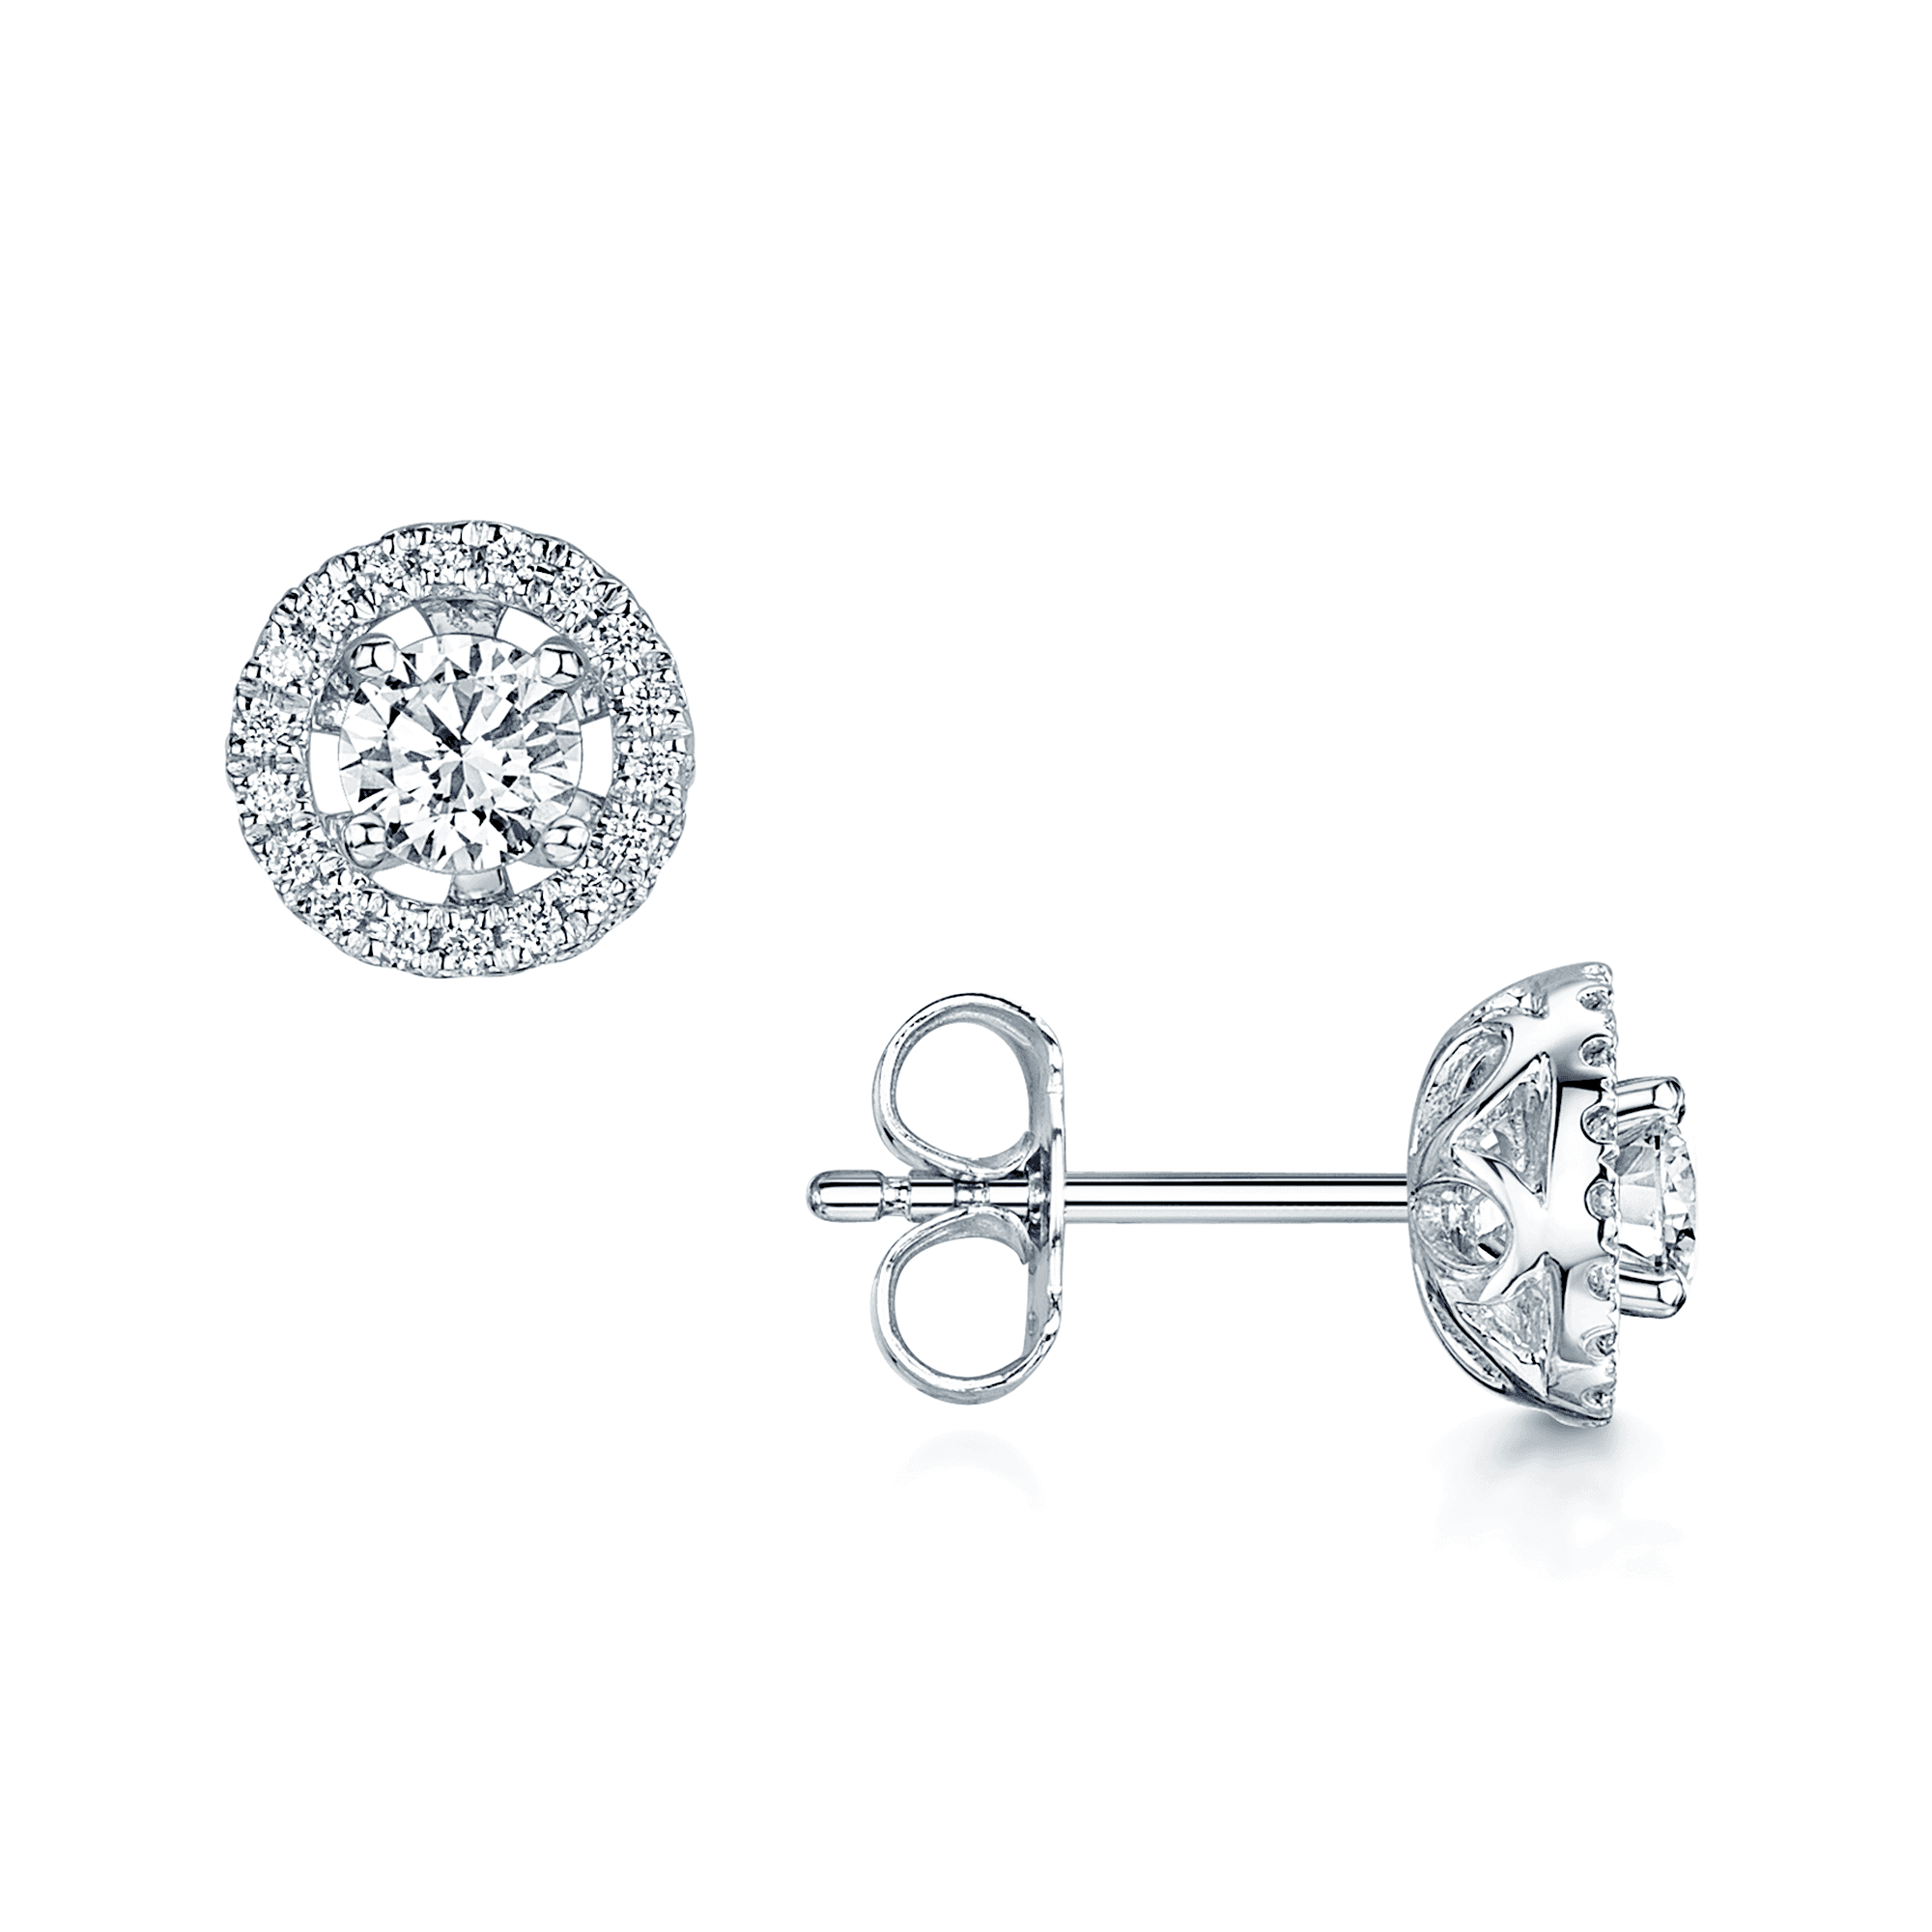 18ct White Gold Round Brilliant Cut Diamond Studs With Interchangeable Outer Diamond Set Halo